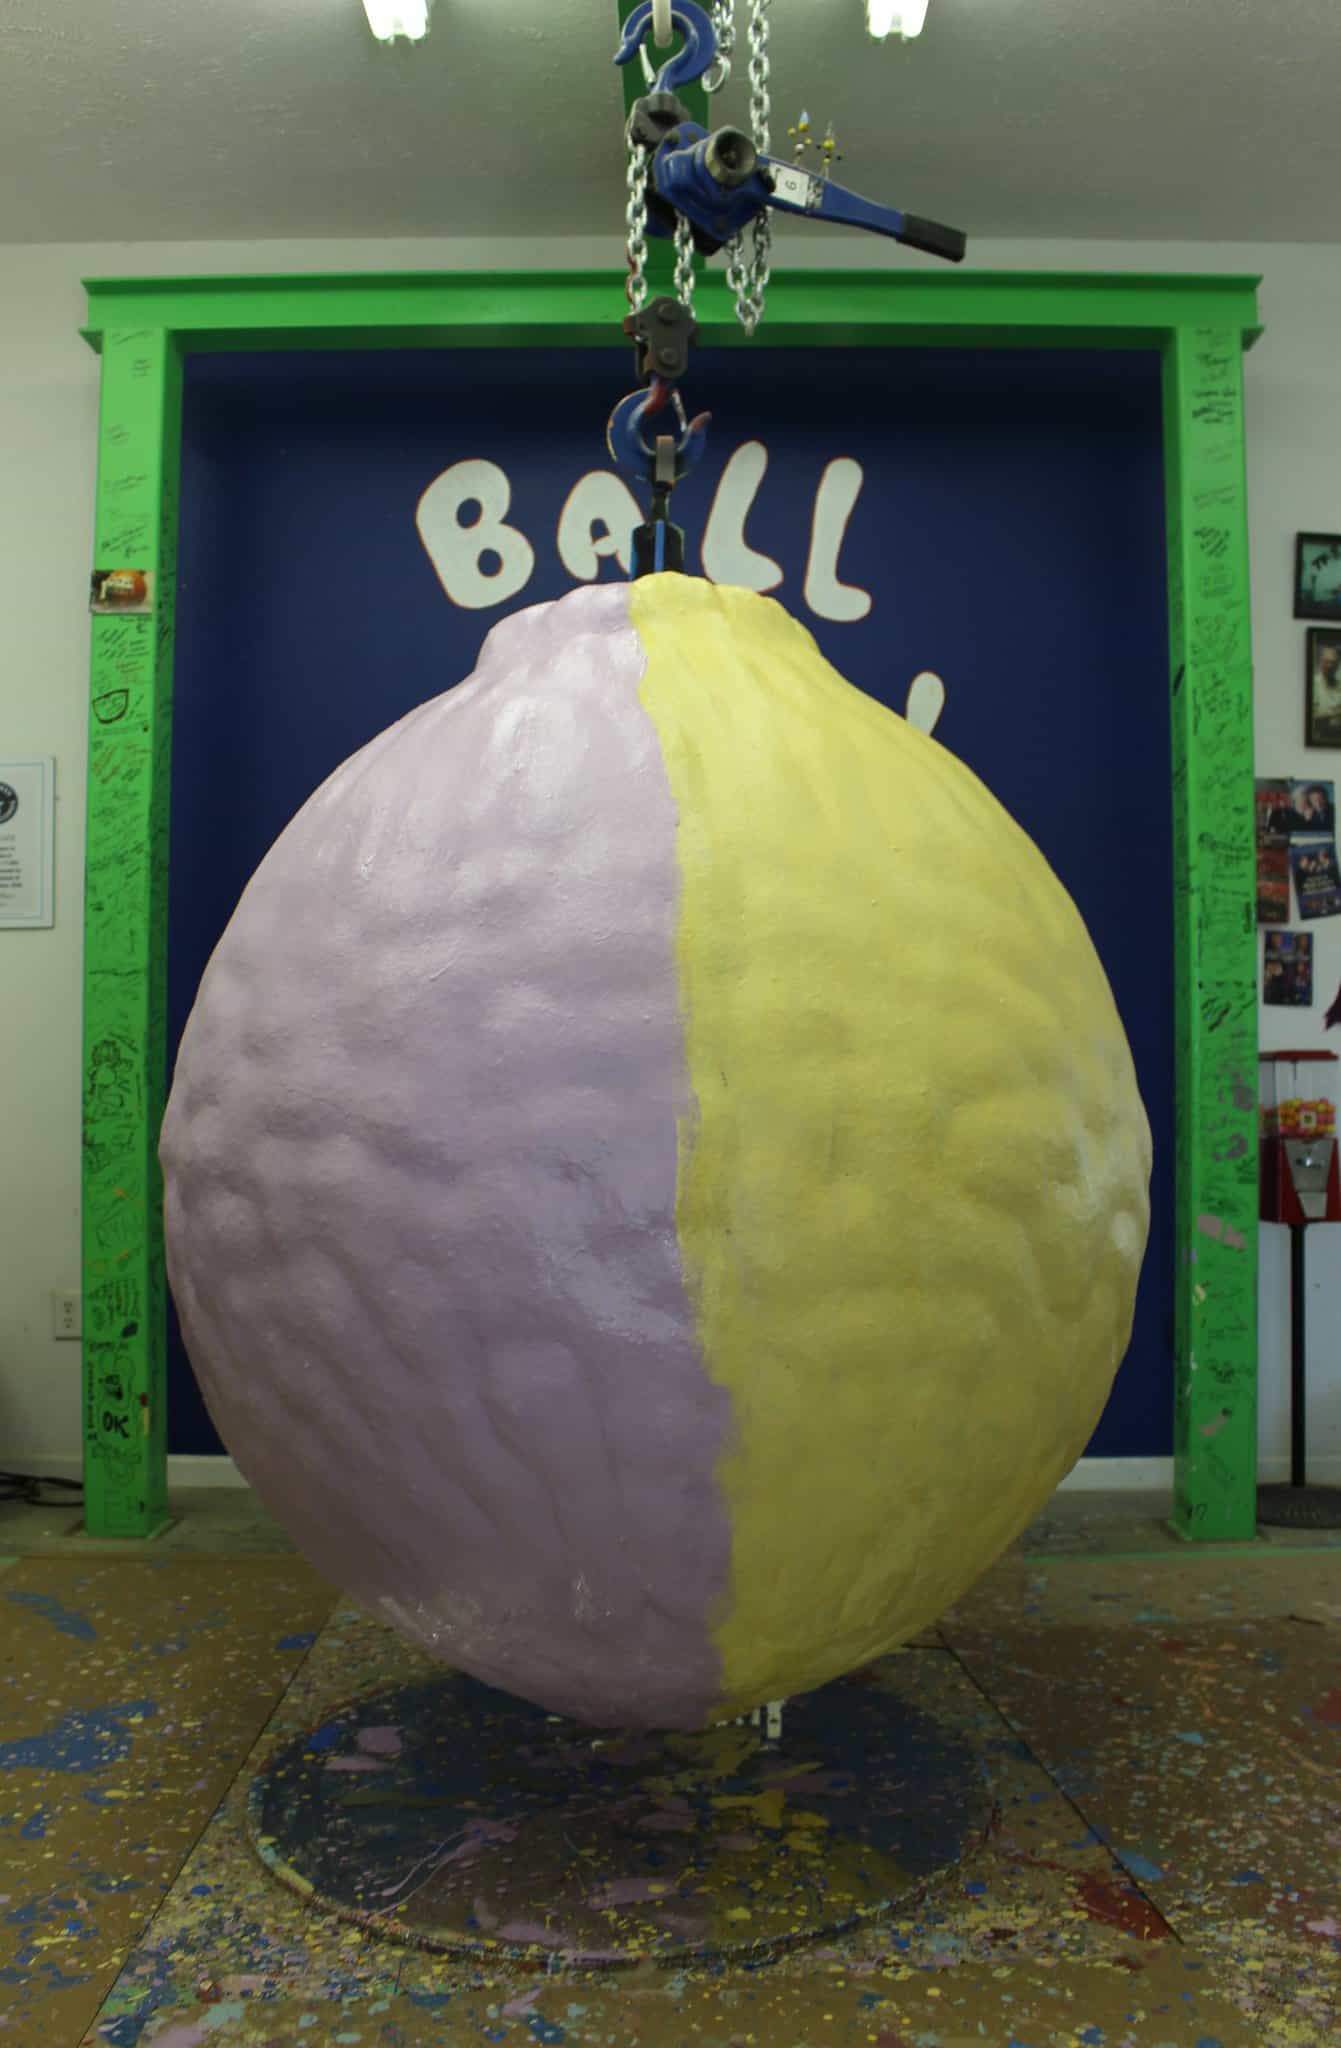 2015-09-06 Indiana Roadtrip- World's Largest Ball of Paint (34) by Steven Pierson